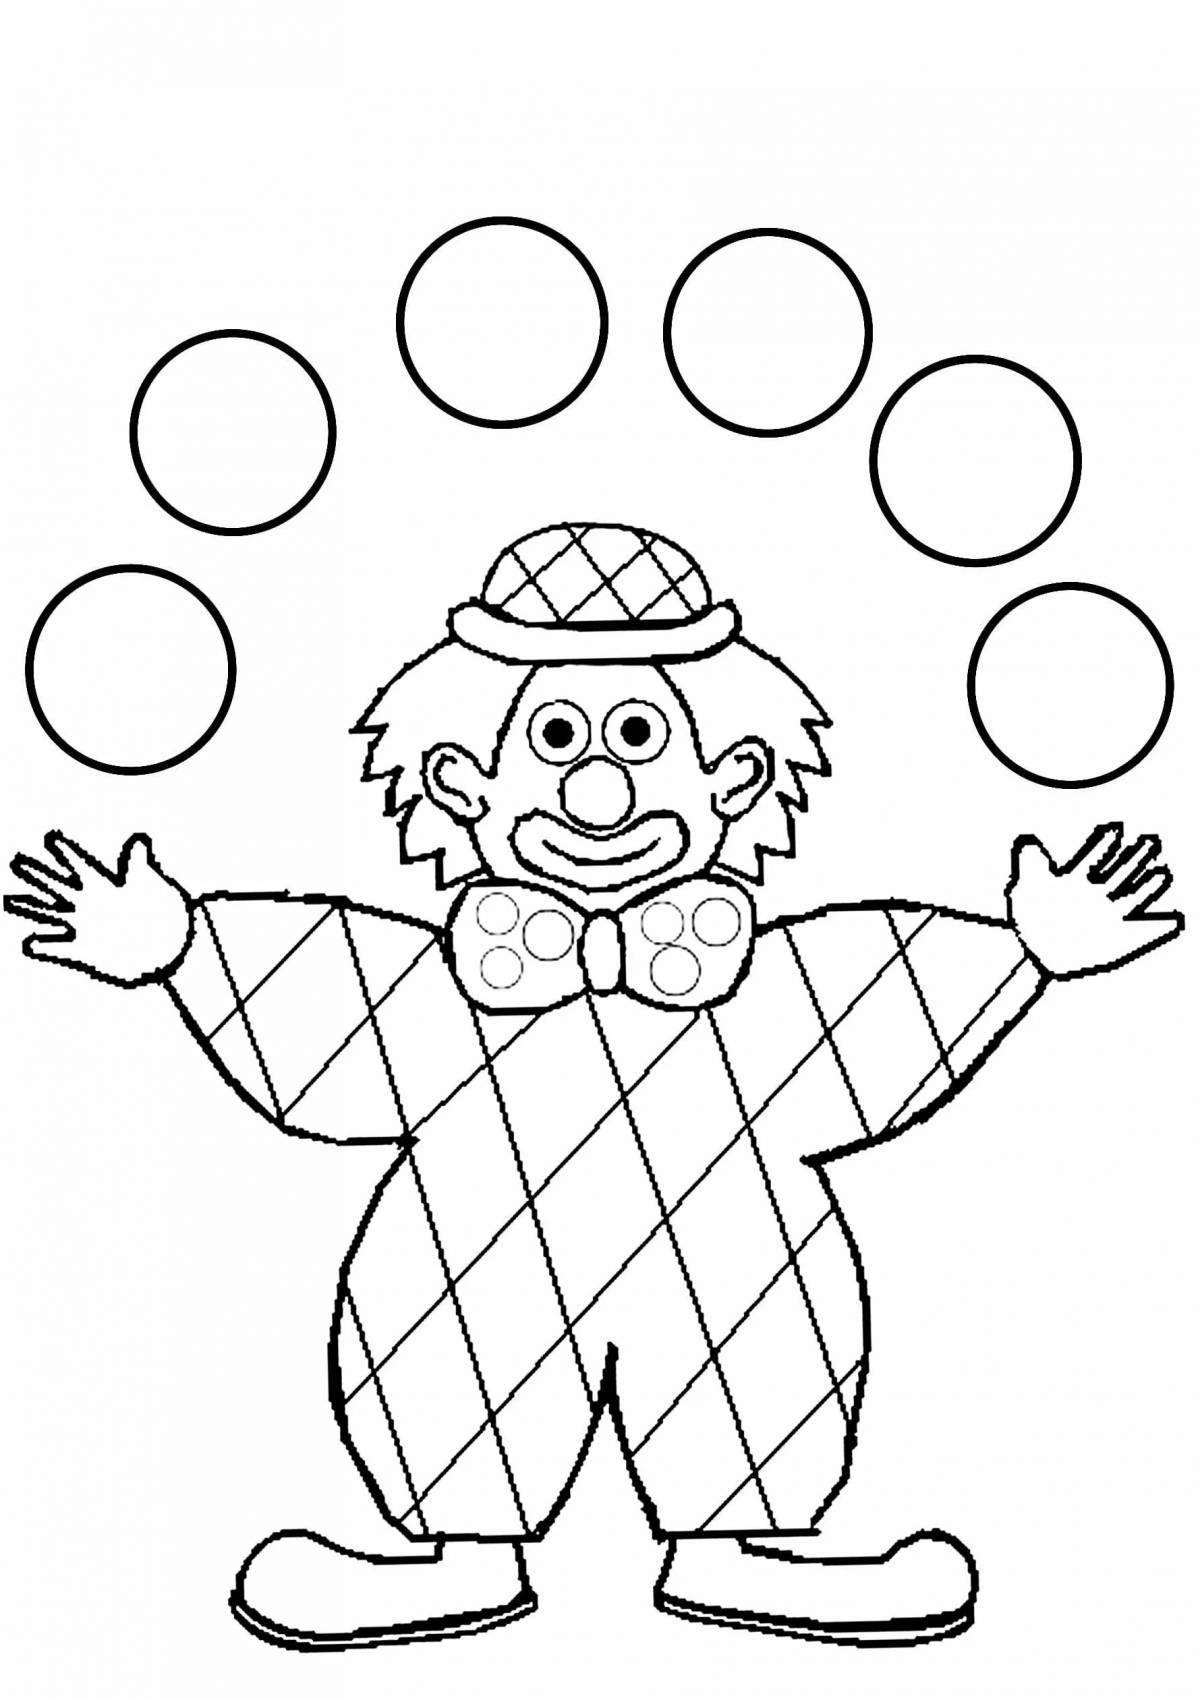 Colorful clown coloring for children 6-7 years old